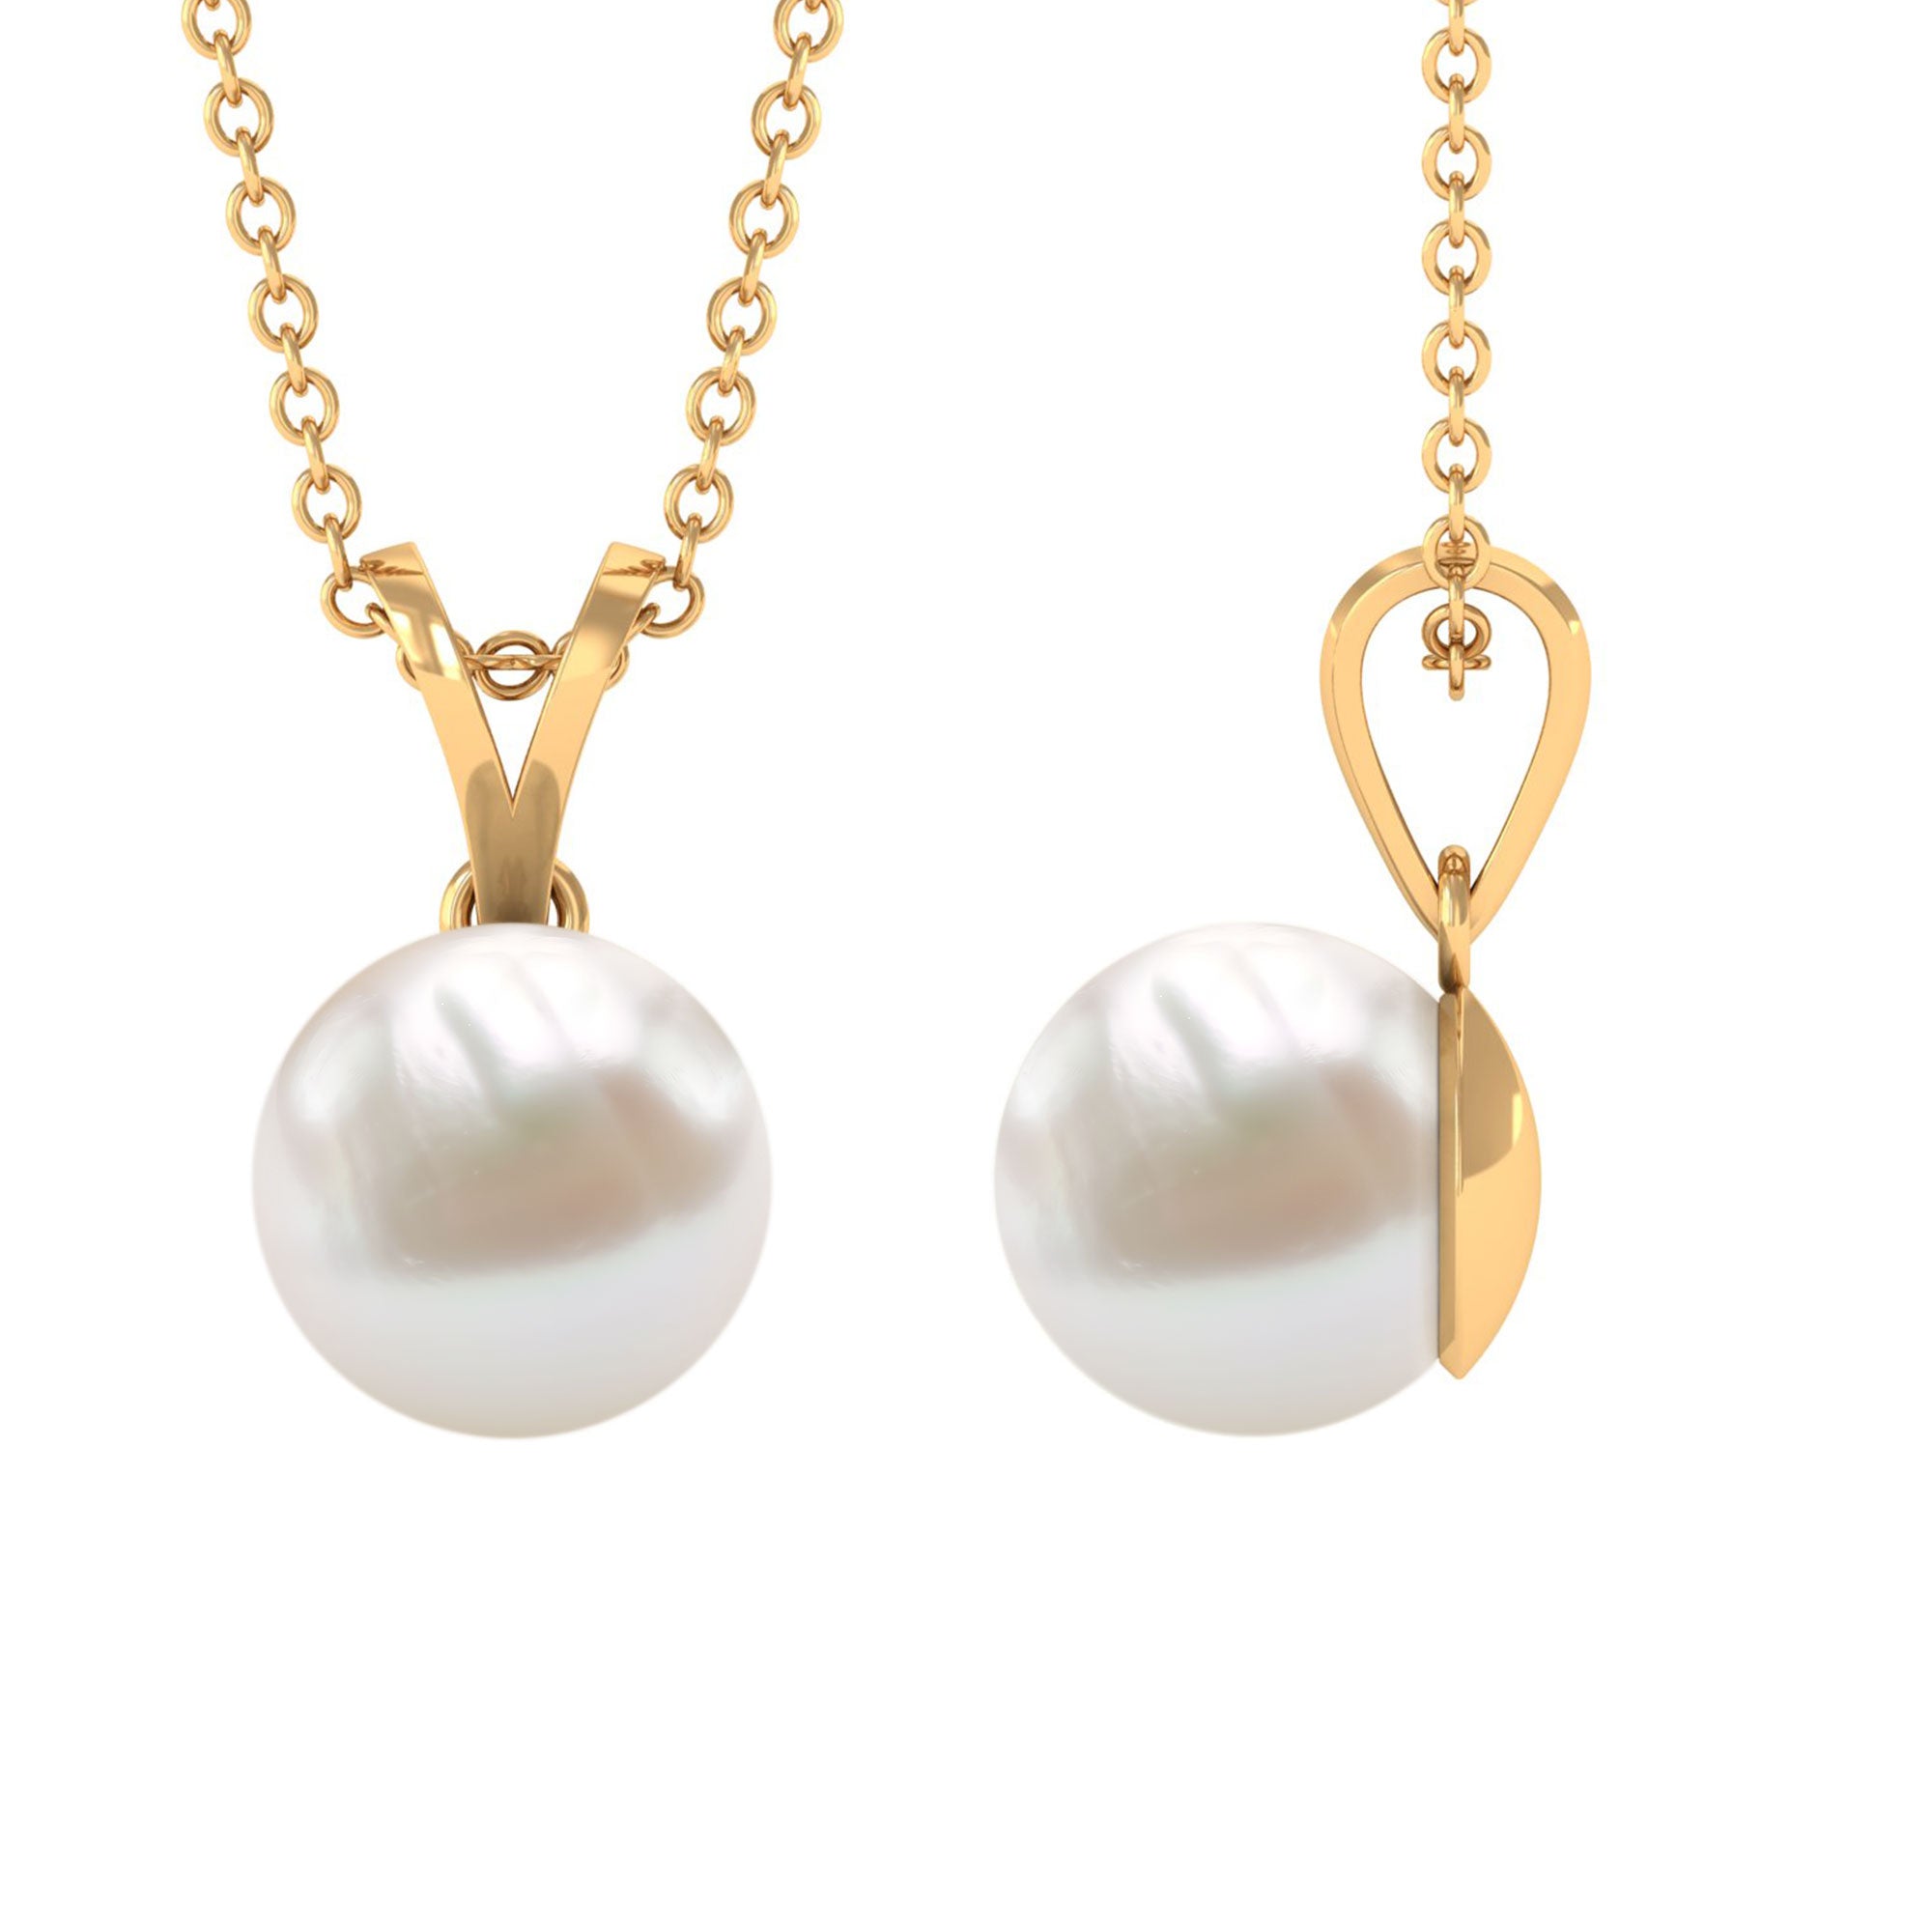 Arisha Jewels-Cultured Freshwater Pearl Solitaire Pendant Necklace